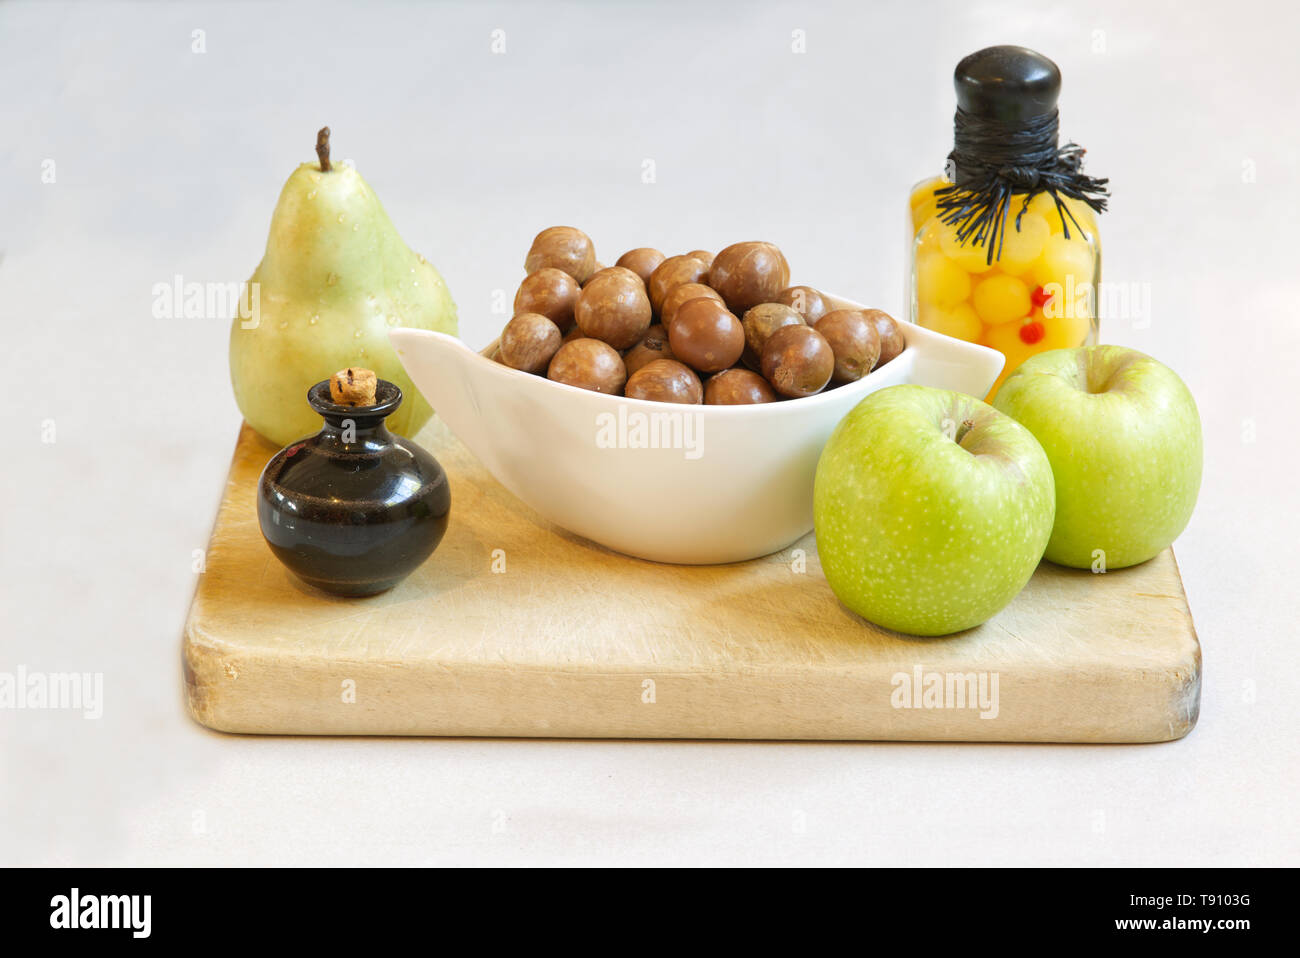 Fruit, nuts and containers on a board. Still Life Stock Photo